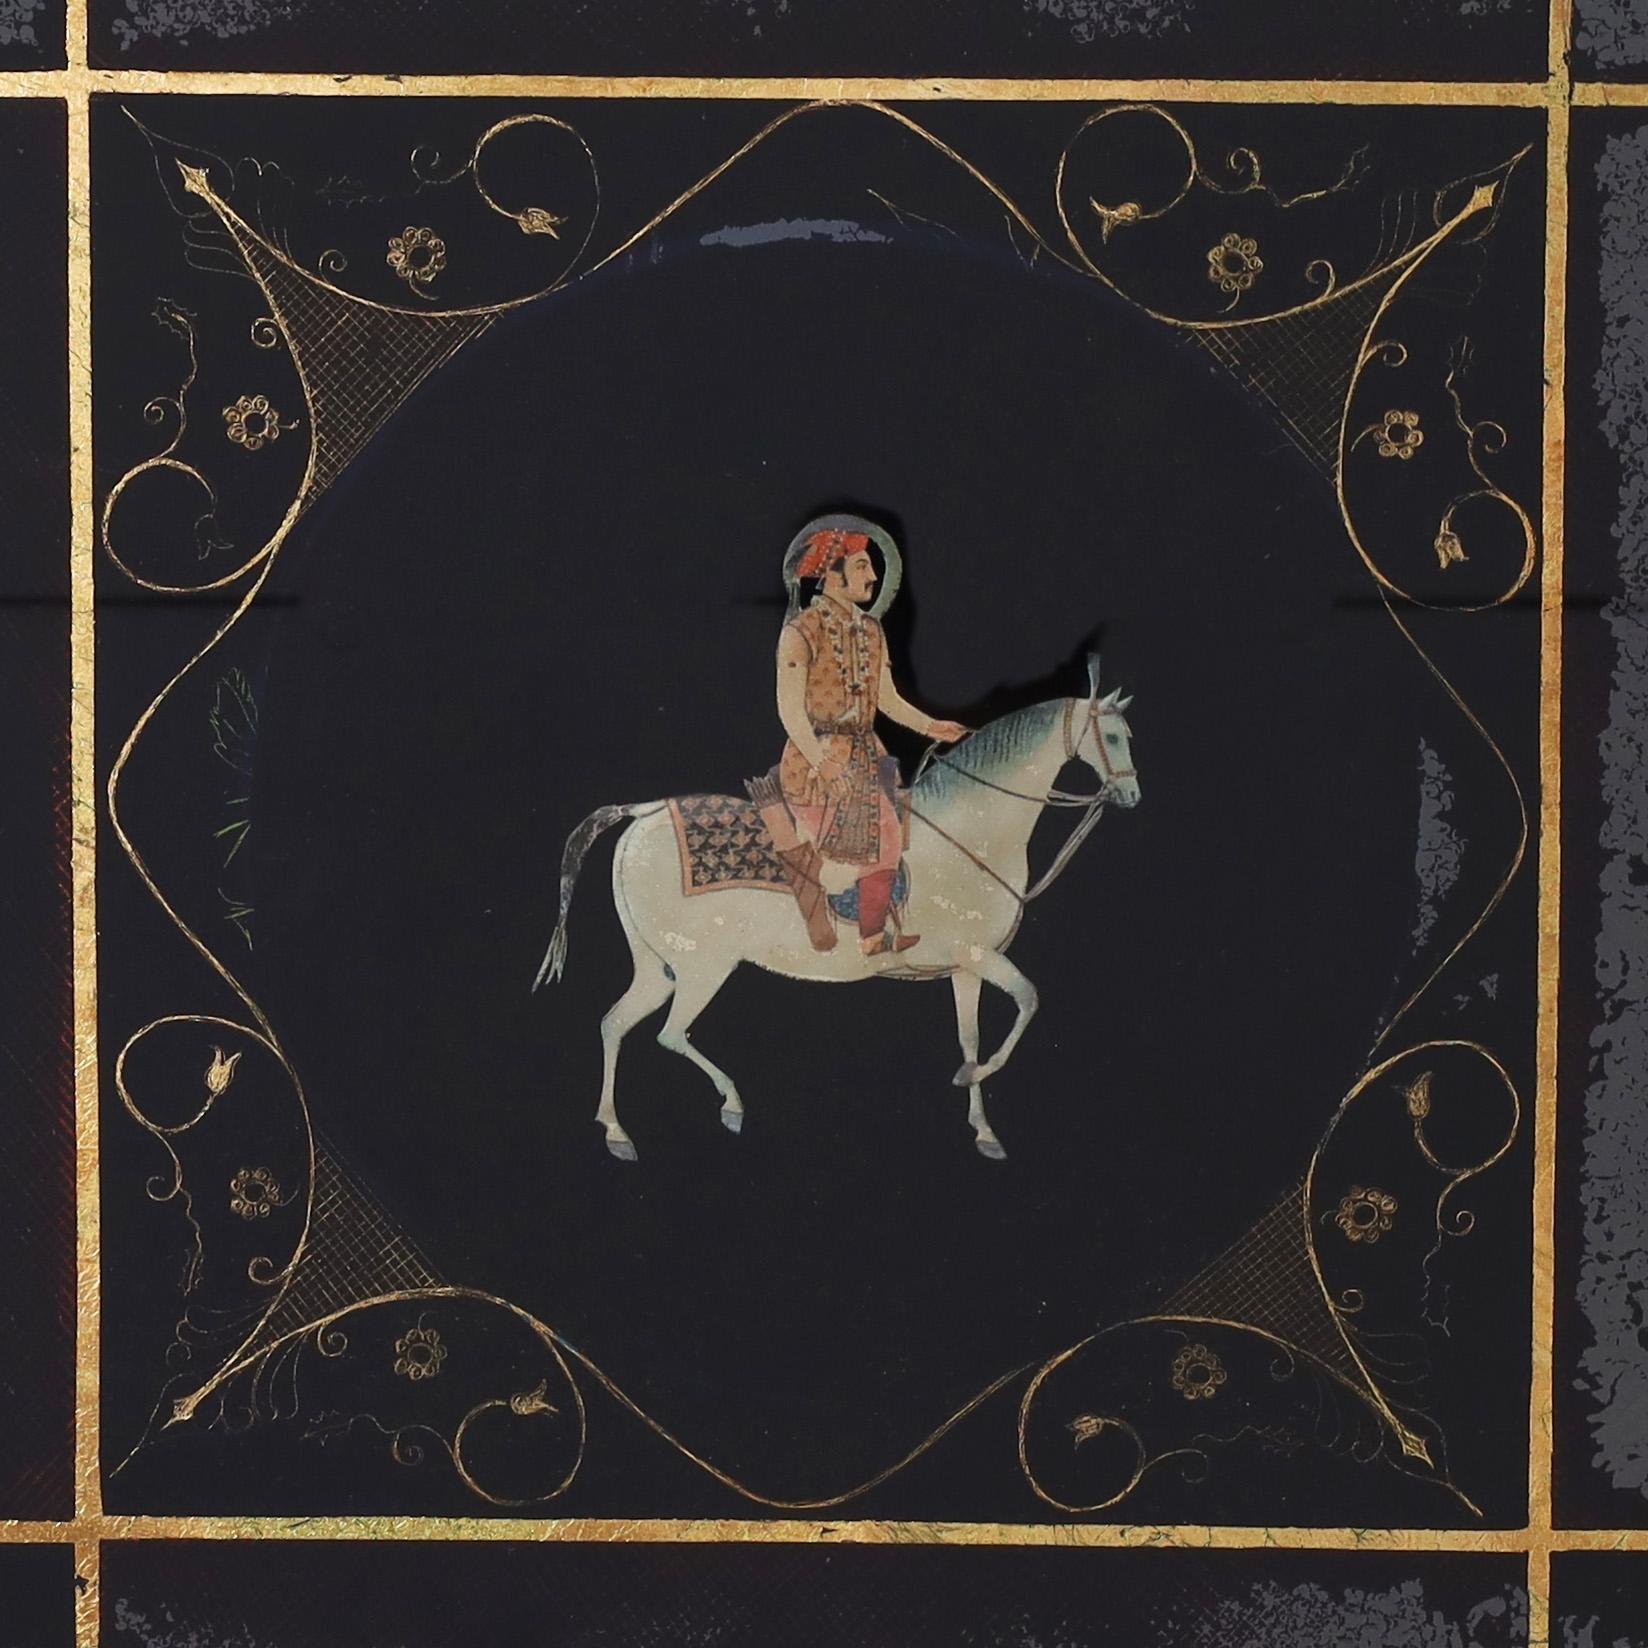 Vintage pair of Anglo Indian watercolors depicting men on horseback decorated with gold leaf floral and geometric designs. Presented in wood frames with gold leaf under glass. 